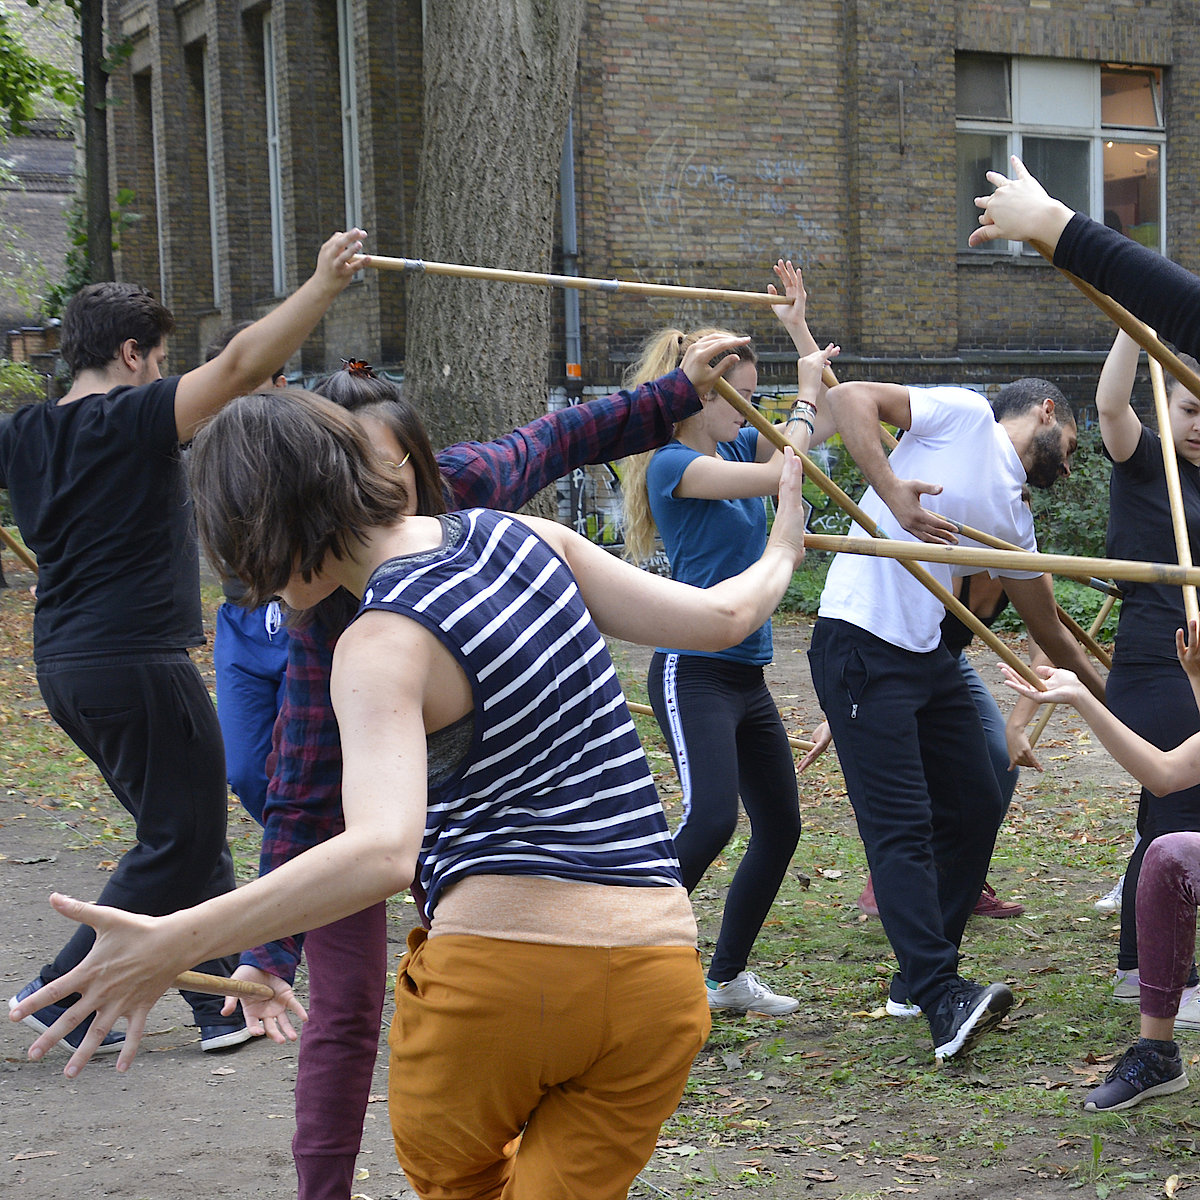 Participants of the Franco-German workshop do a theater exercise with a wooden stick they hold with the palm of their hand.